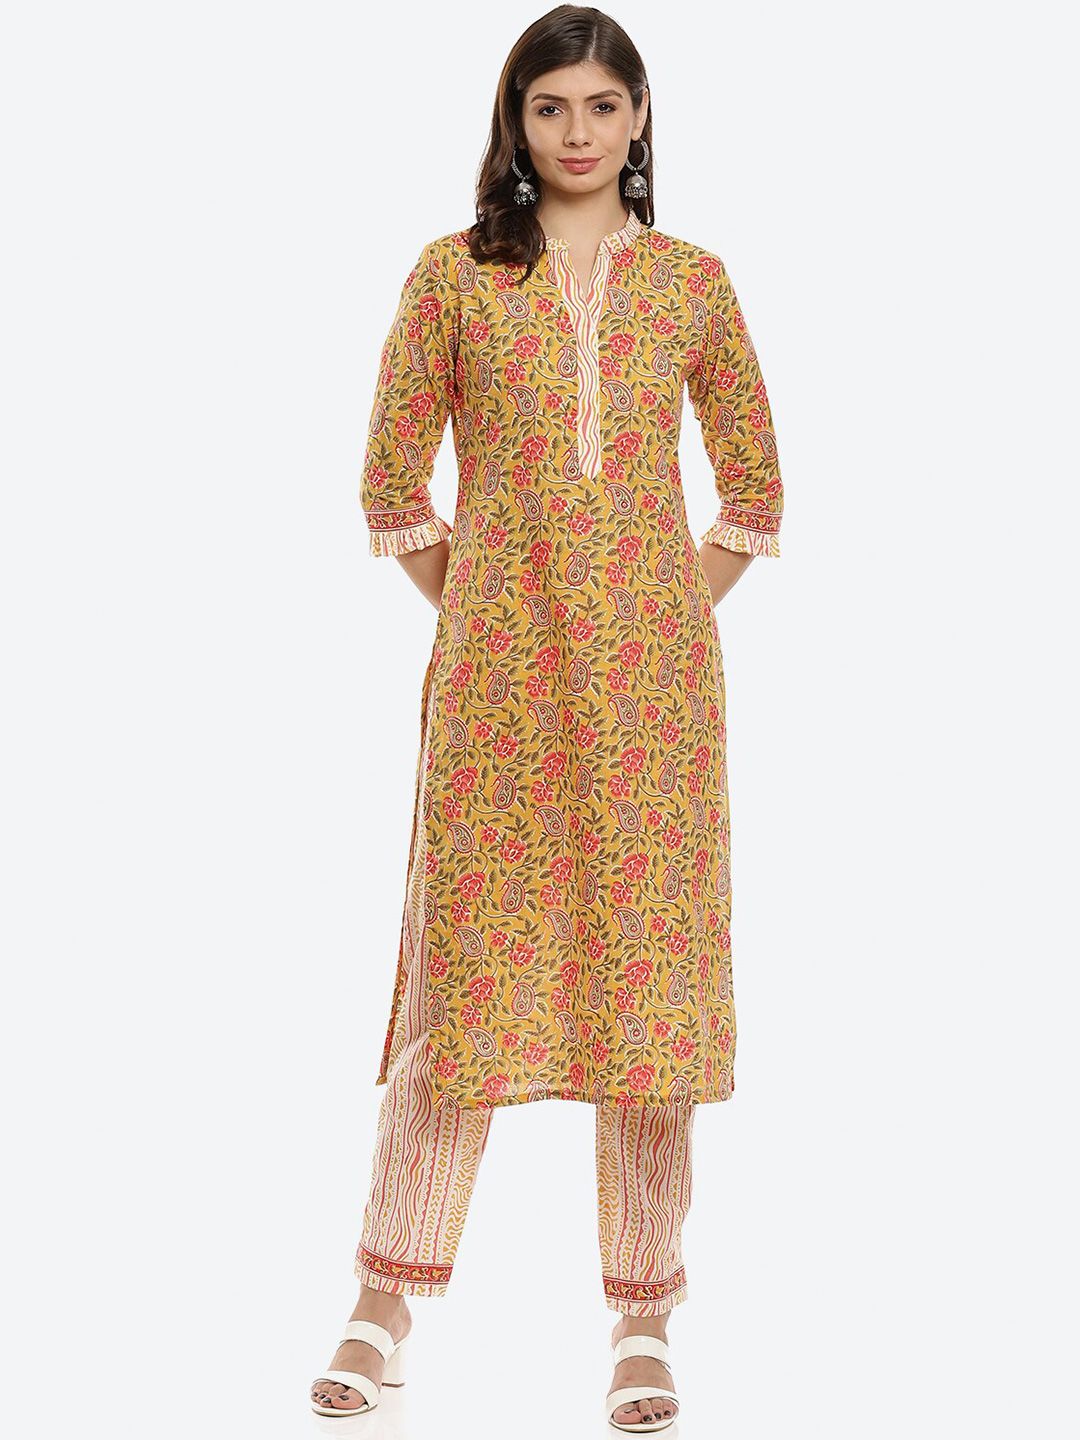 Biba Yellow & Red Printed Pure Cotton Unstitched Dress Material Price in India